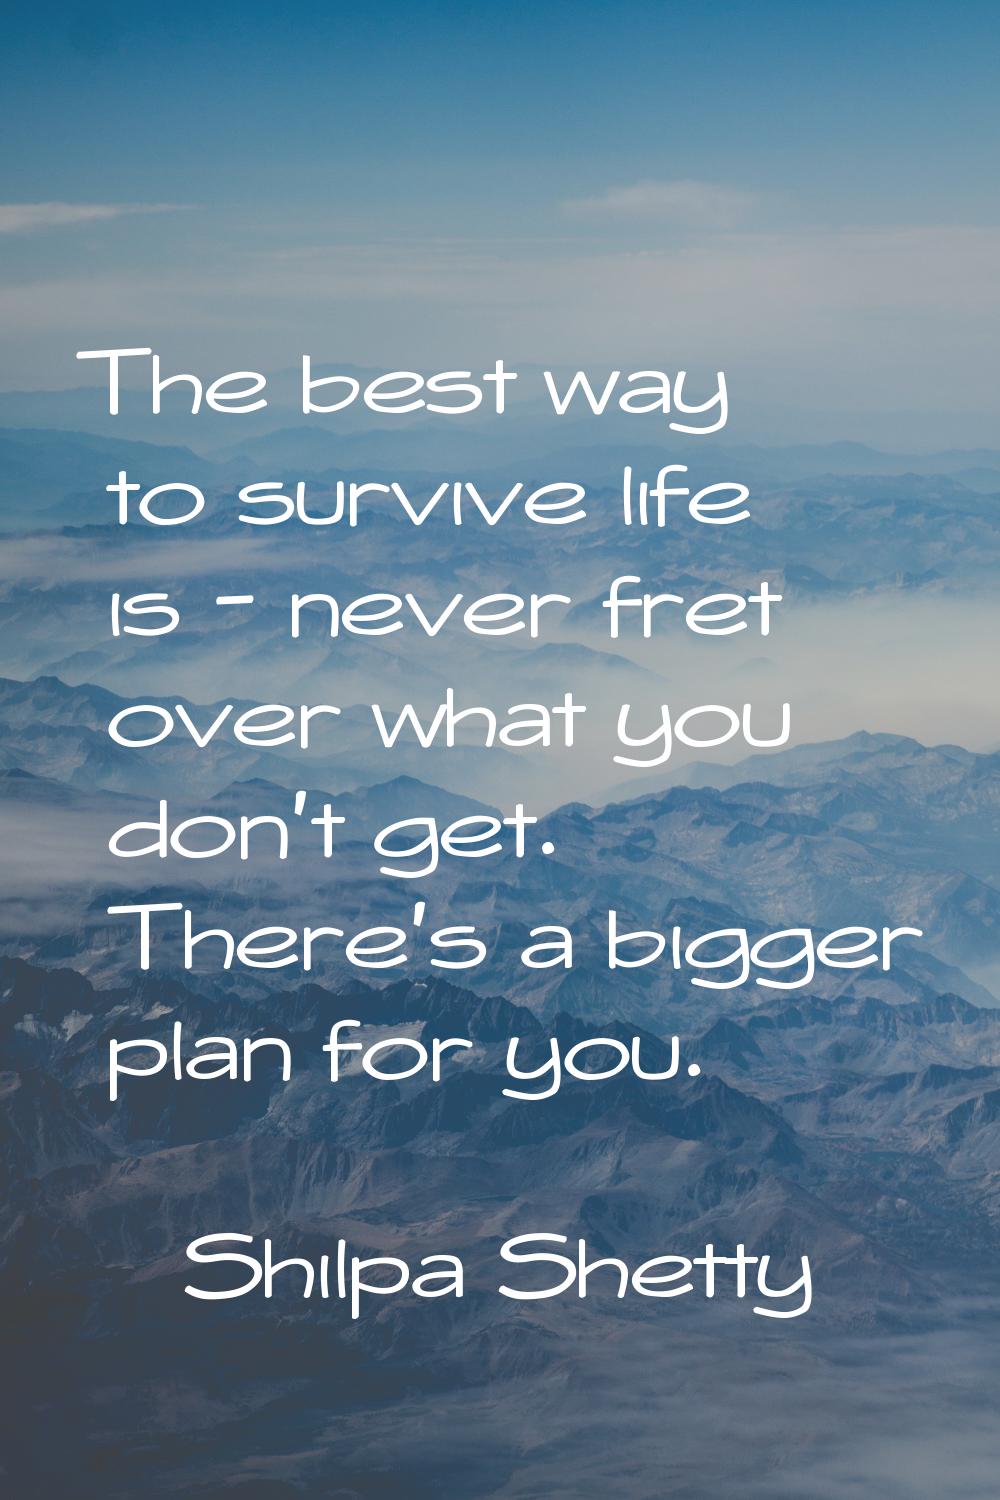 The best way to survive life is - never fret over what you don't get. There's a bigger plan for you